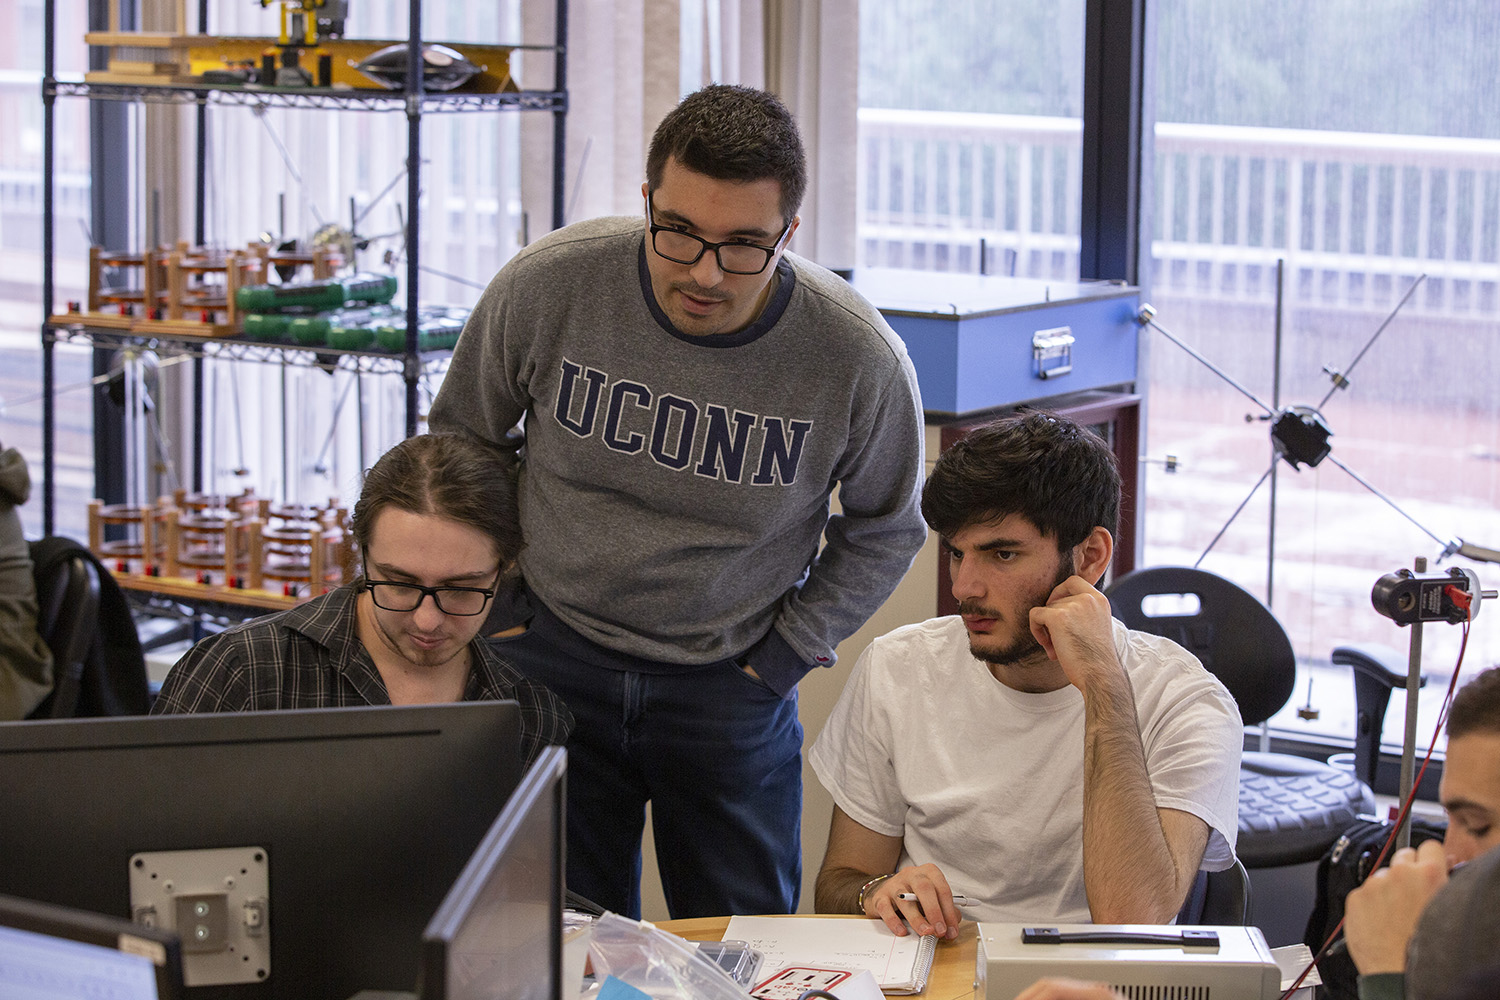 Graduate teaching assistant Lukasz Kuna instructs PHYS 1602: Fundamentals of Physics II in a new Studio Learning Lab located in the Gant Science Complex on November 5, 2018. (Bri Diaz/UConn Photo)